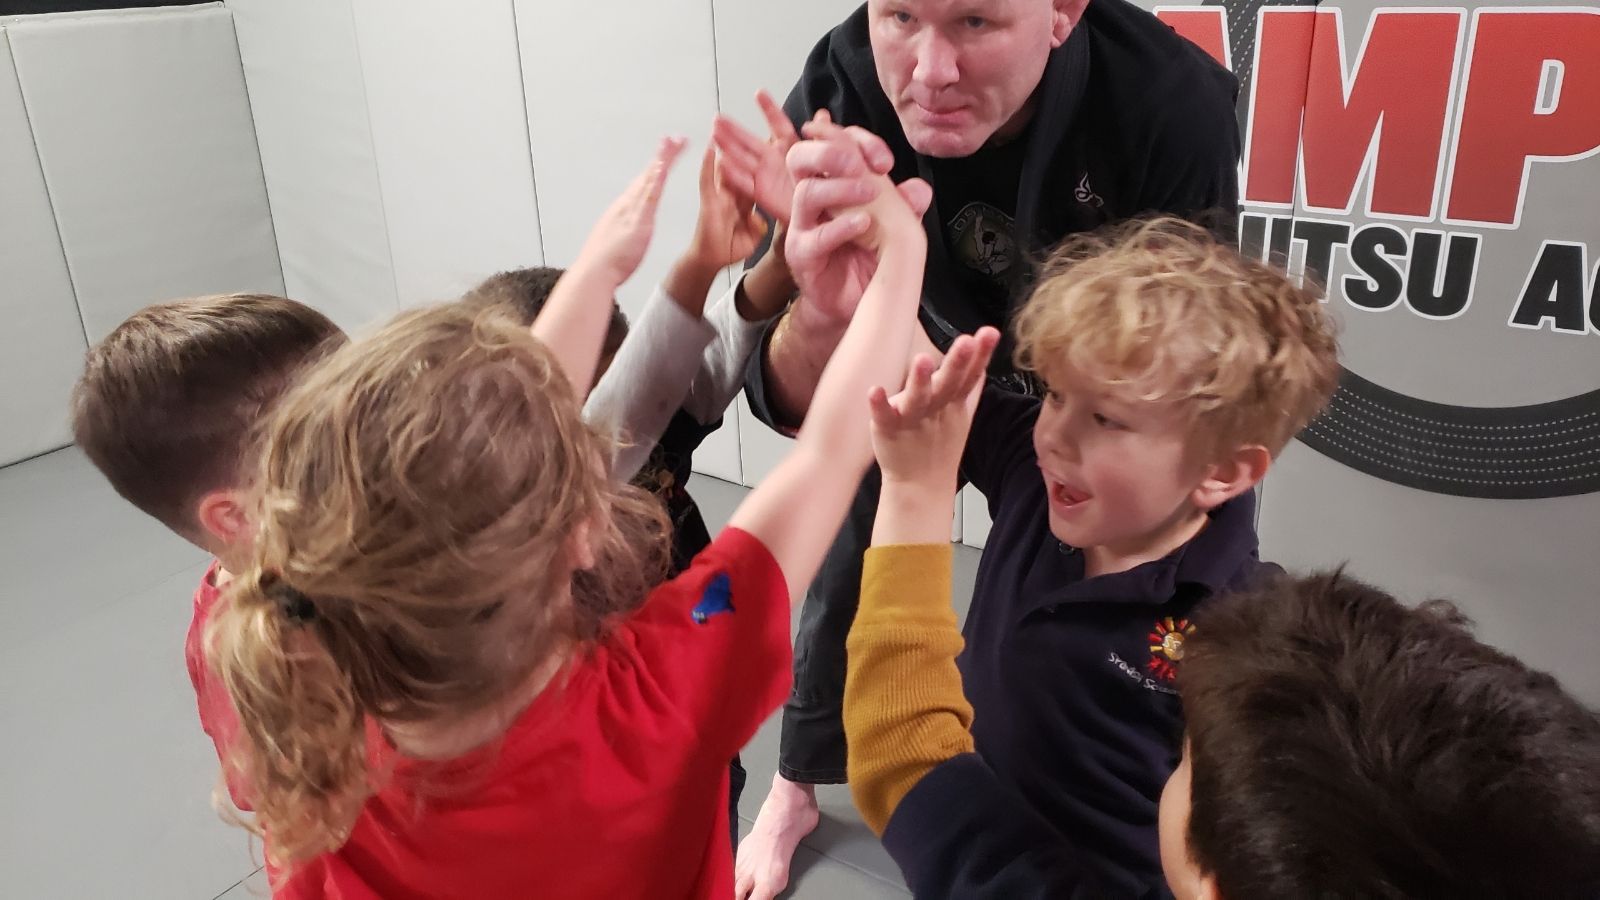 A group of children are giving each other a high five.